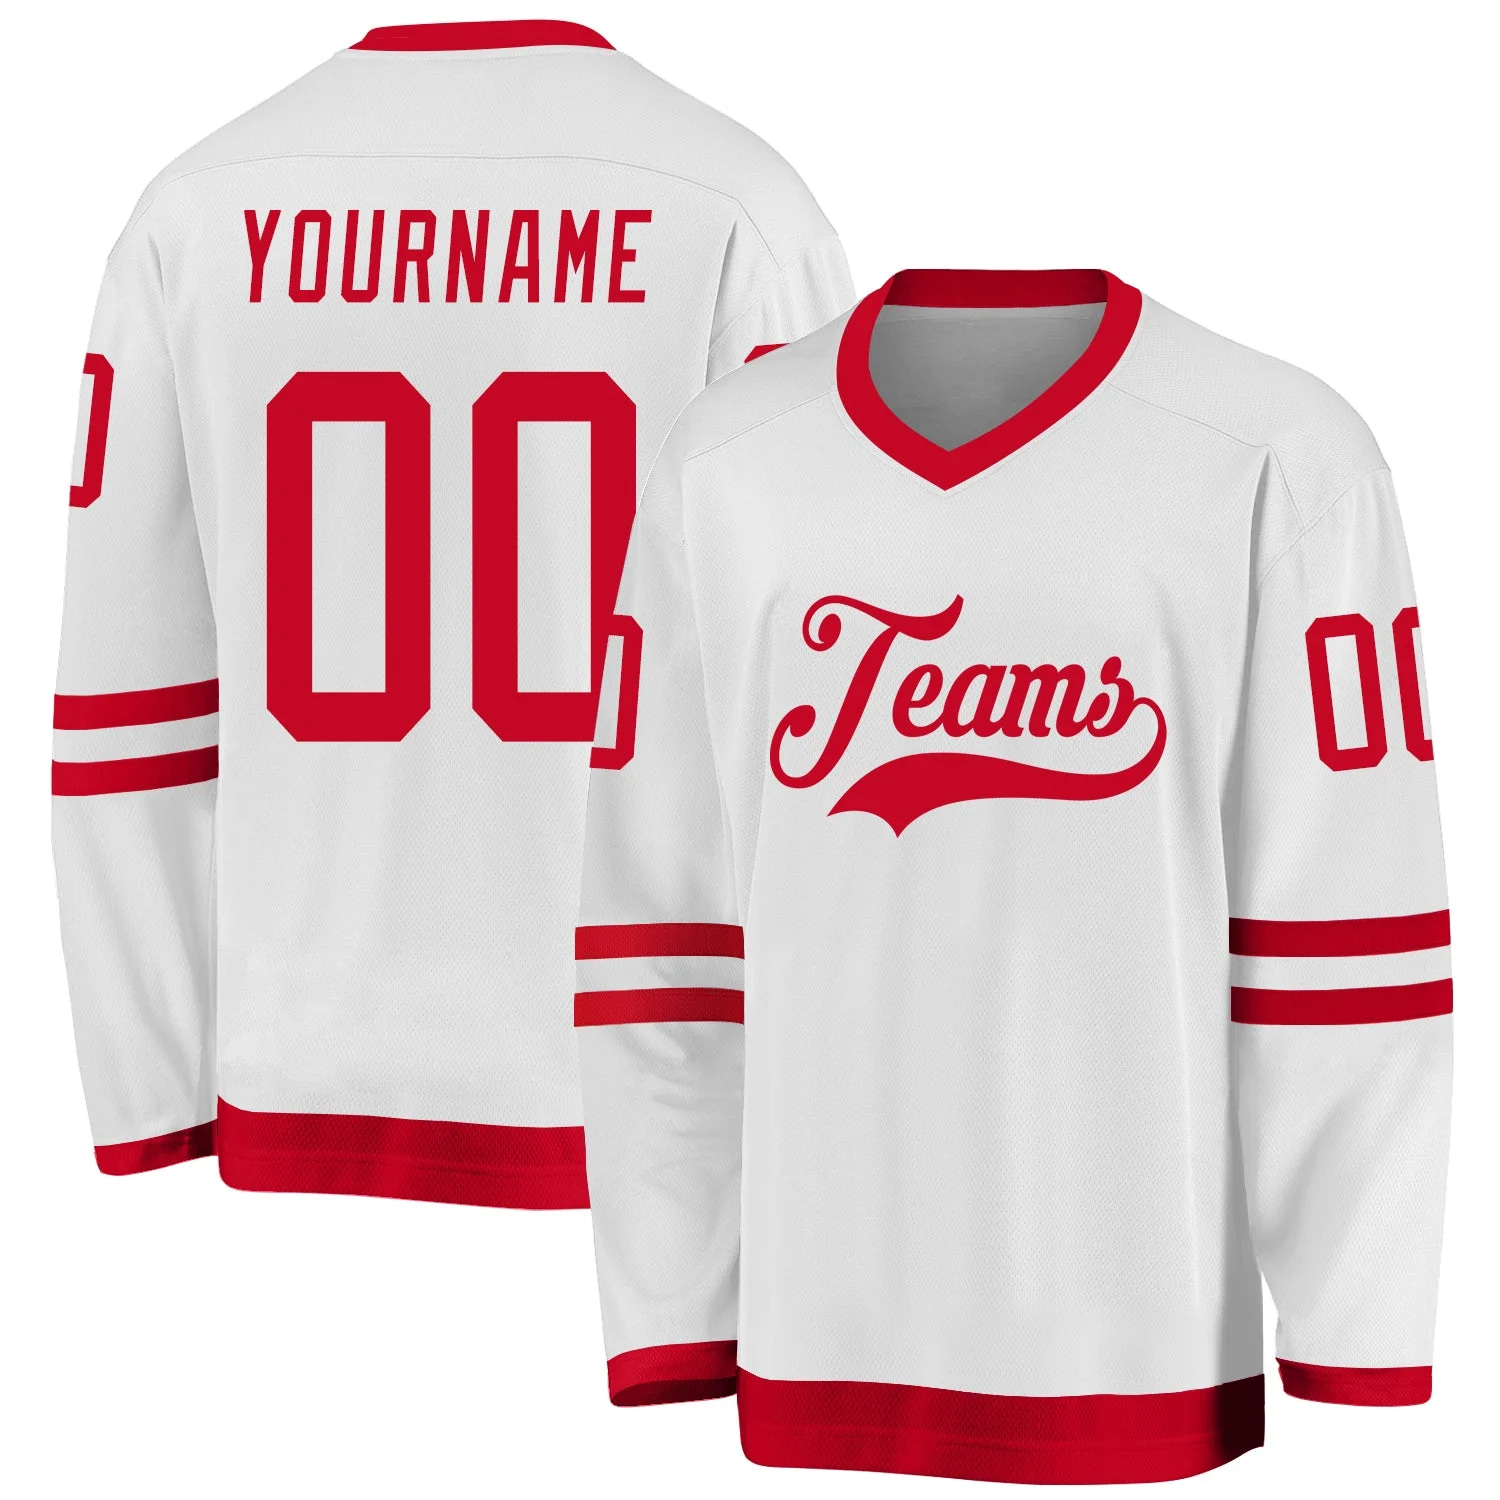 Stitched And Print White Red Hockey Jersey Custom